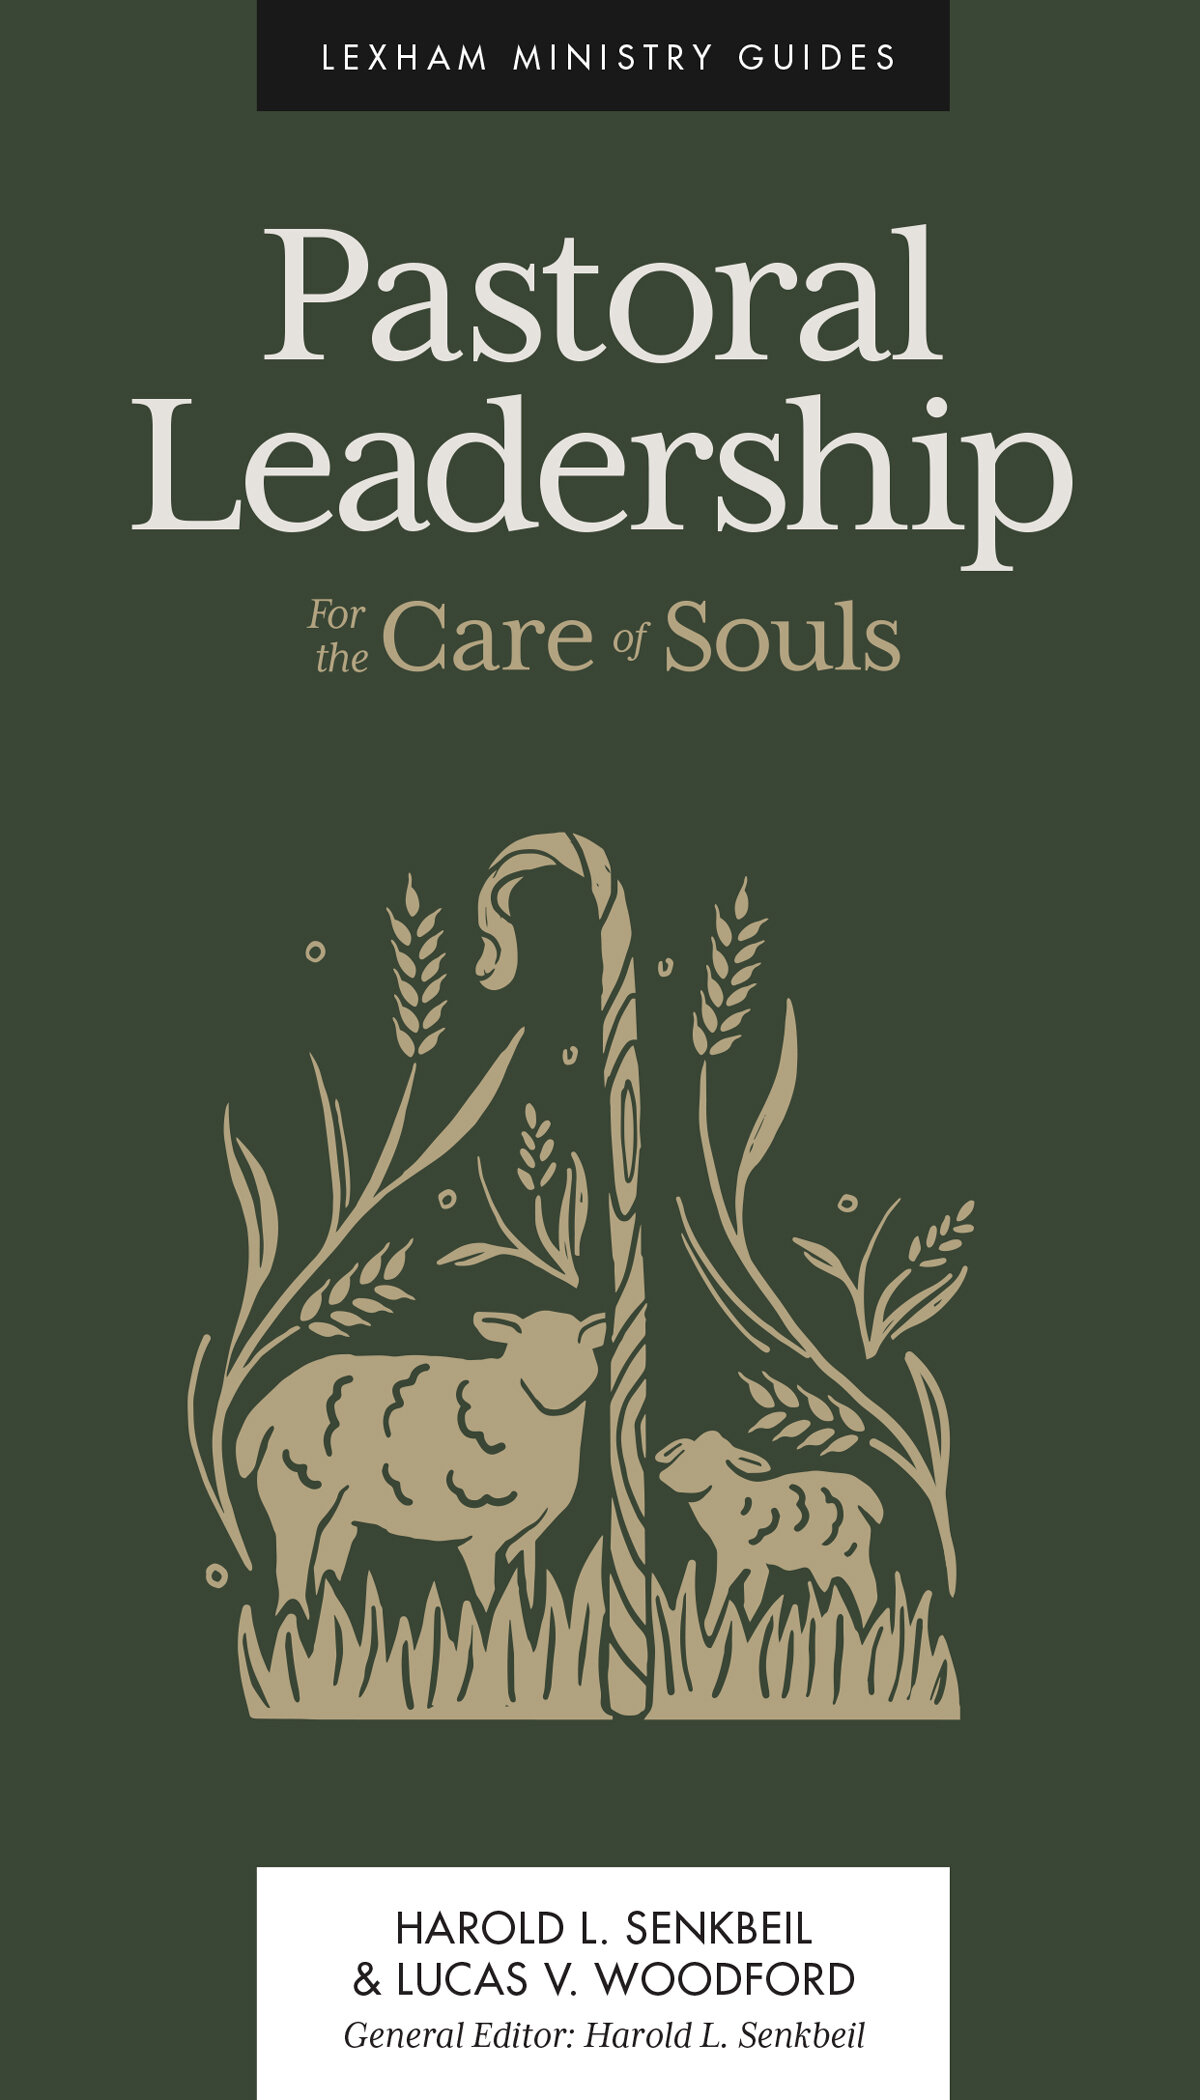 Pastoral Leadership: For the Care of Souls (Lexham Ministry Guides)